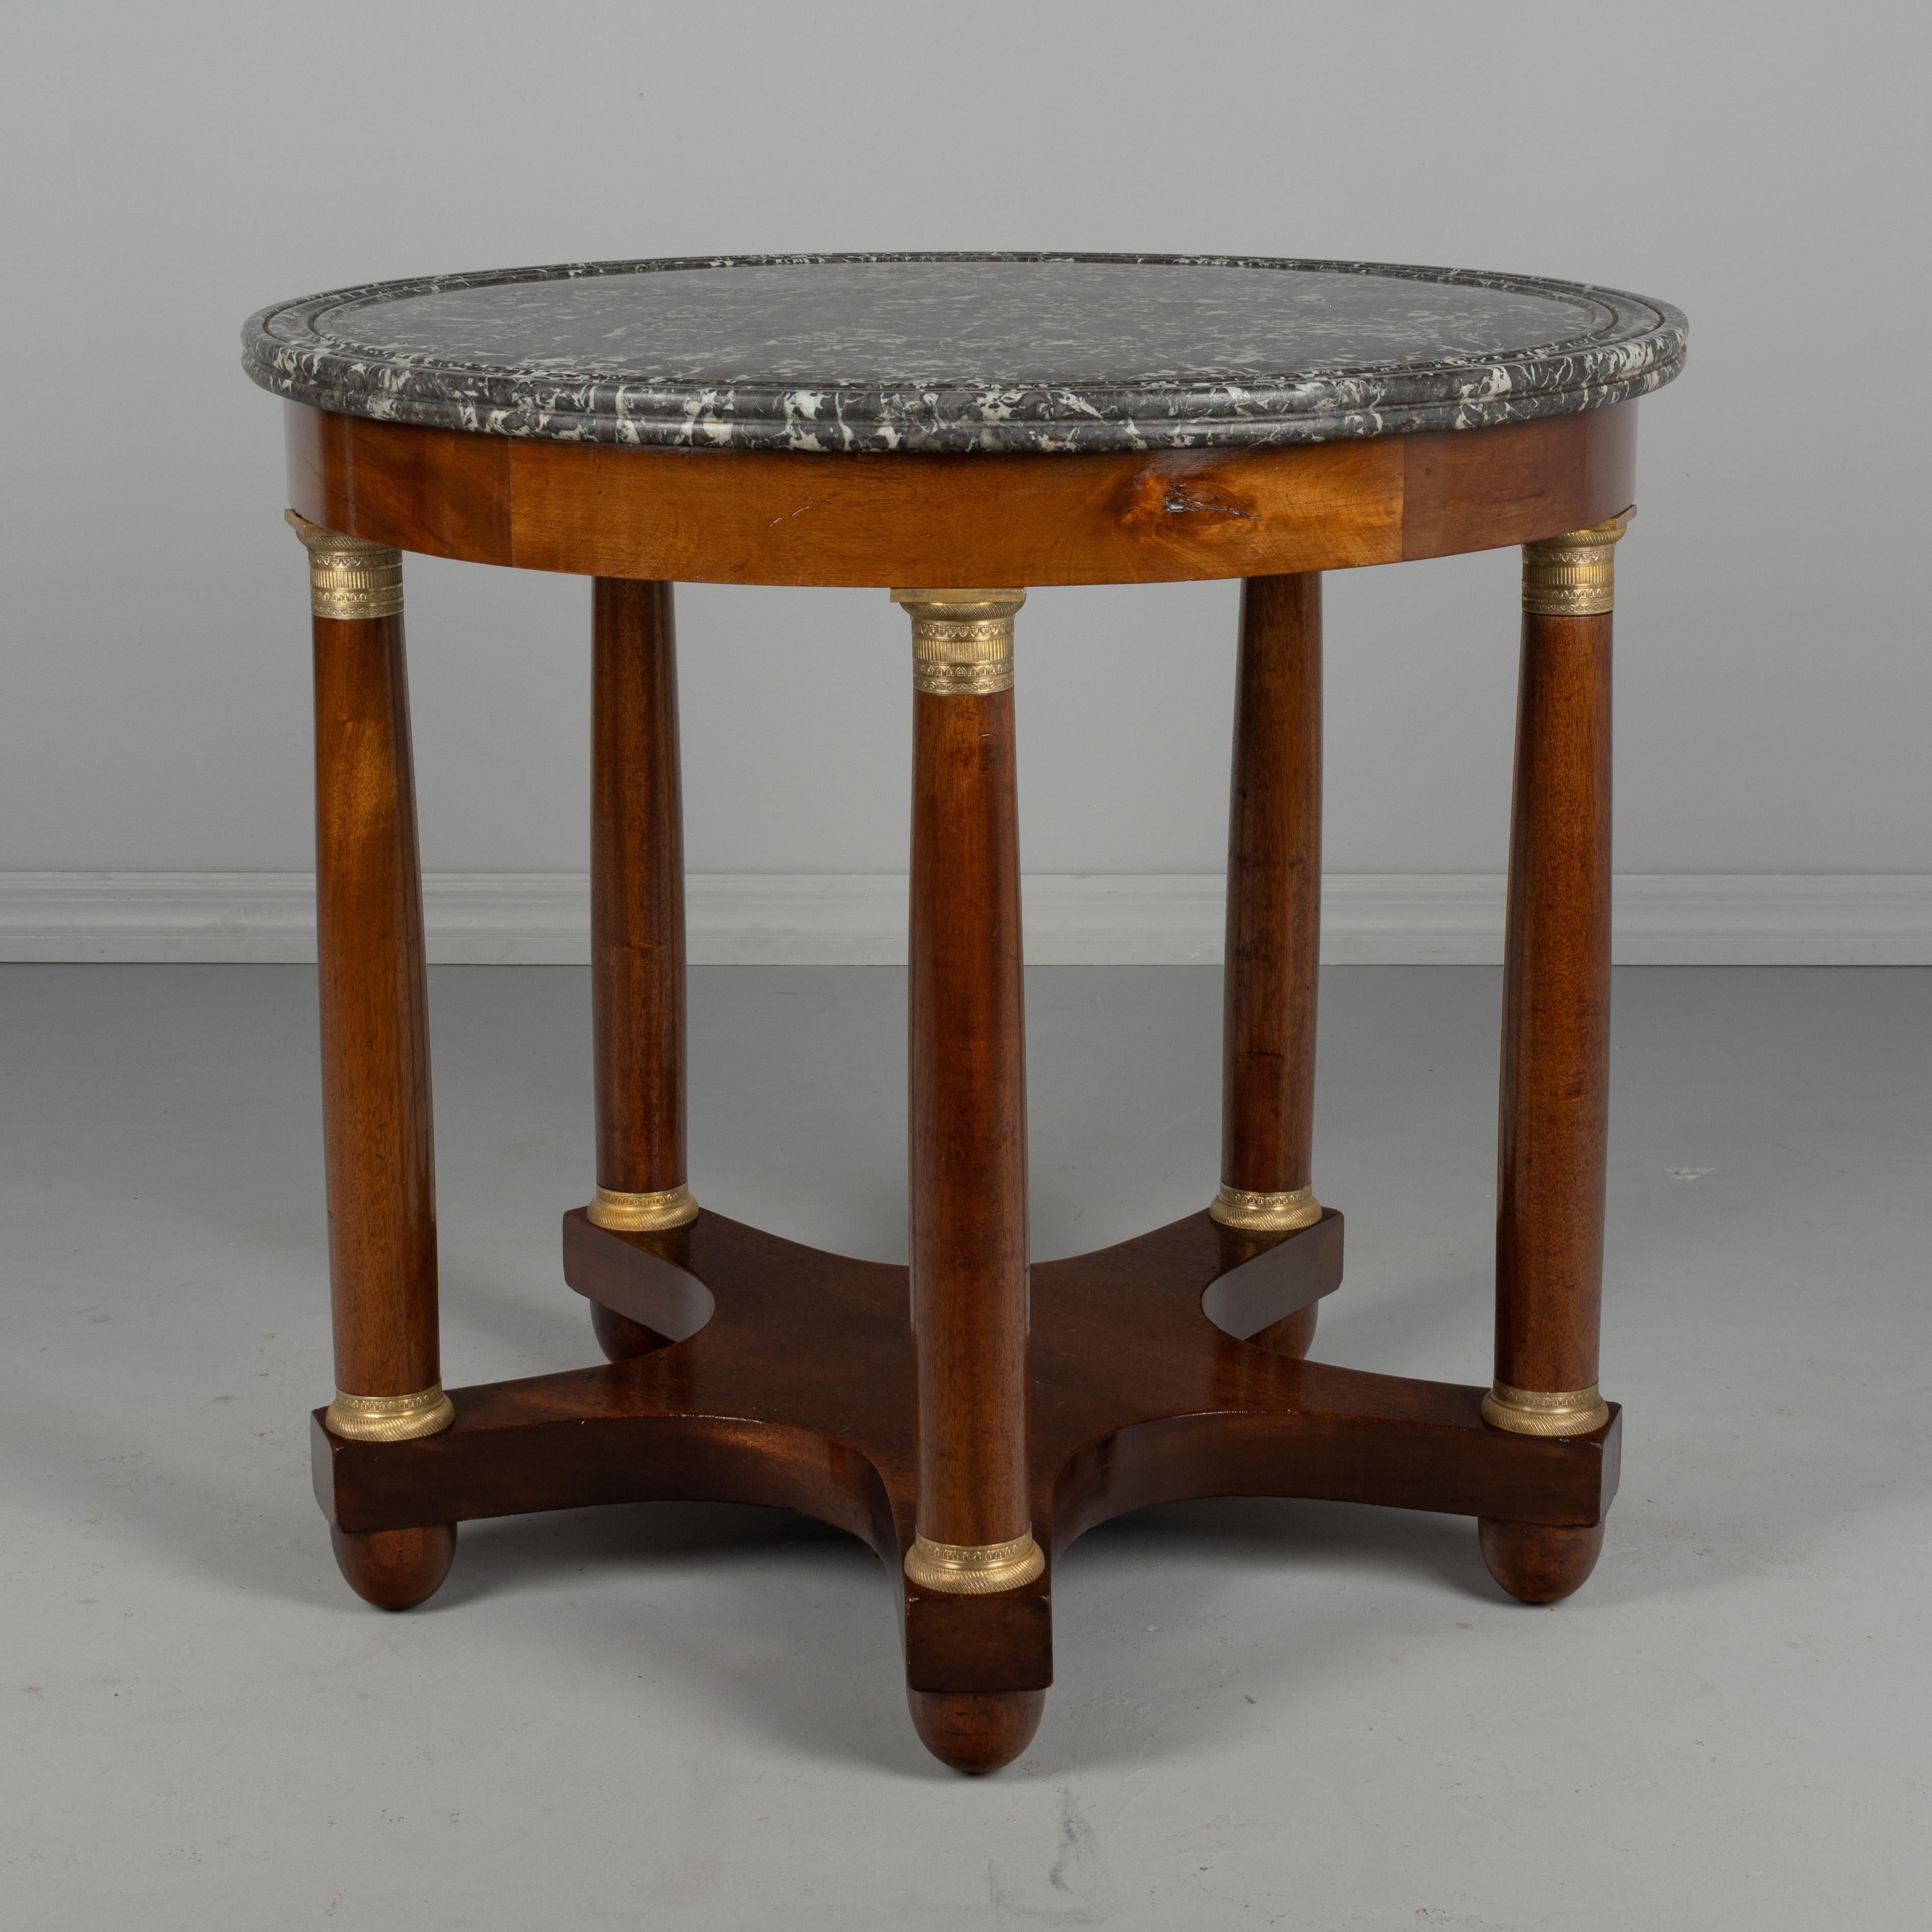 A fine 19th century French Empire style gueridon or center table made of solid mahogany with veneer of mahogany banding around the top. Five bronze mounted legs on a curved base with bun feet. Grey St. Anne marble top with double grooves. French